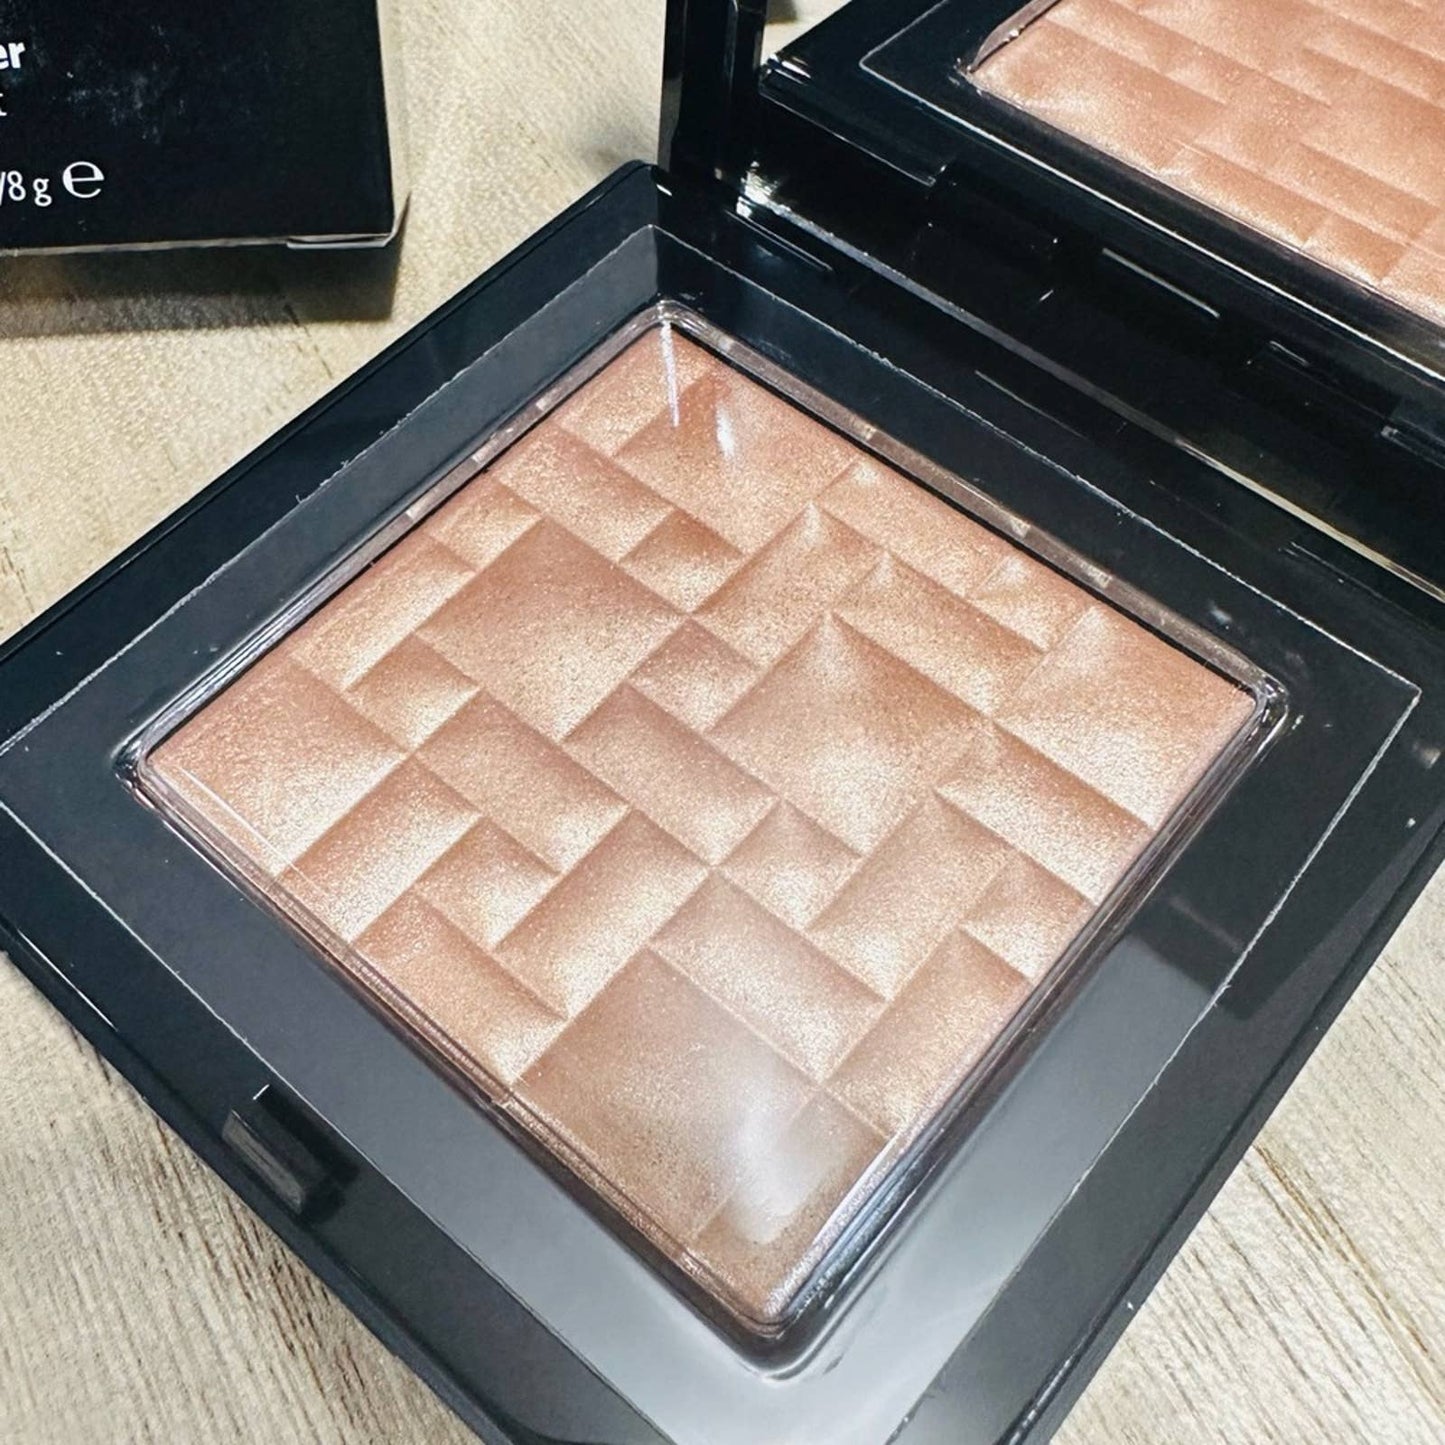 Bobbi Brown Full Size Highlighter Shade: Afternoon Glow